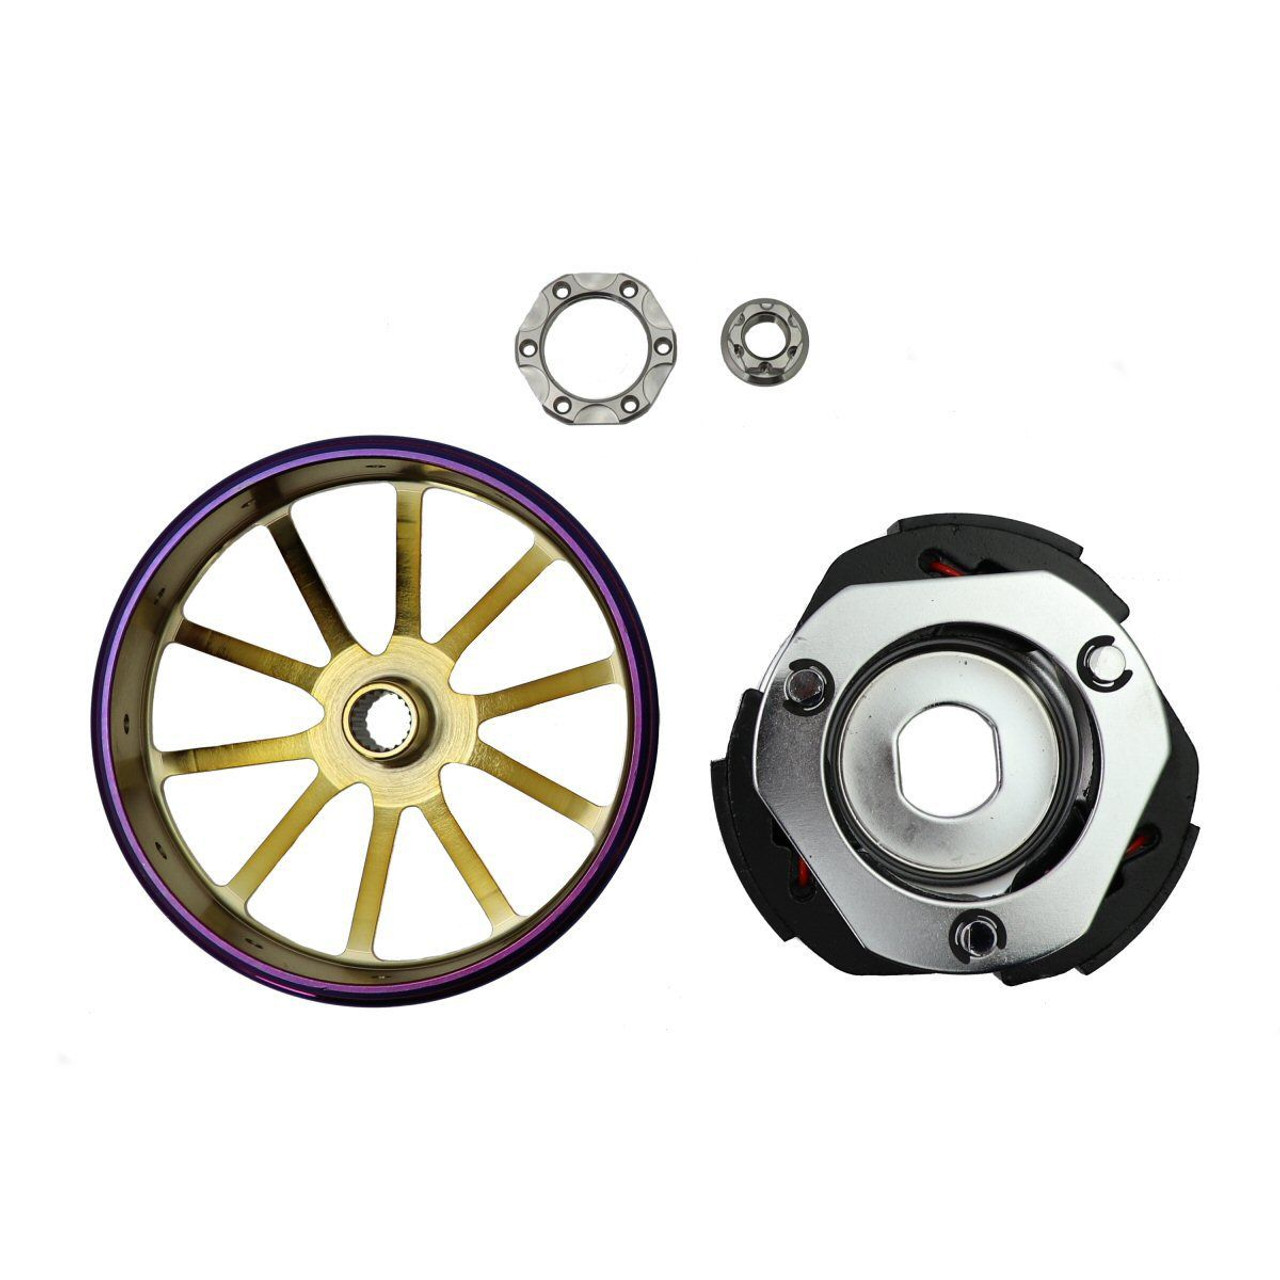 TFC CLUTCH KIT FOR 150cc - 232cc GY6 PERFORMANCE ENGINES